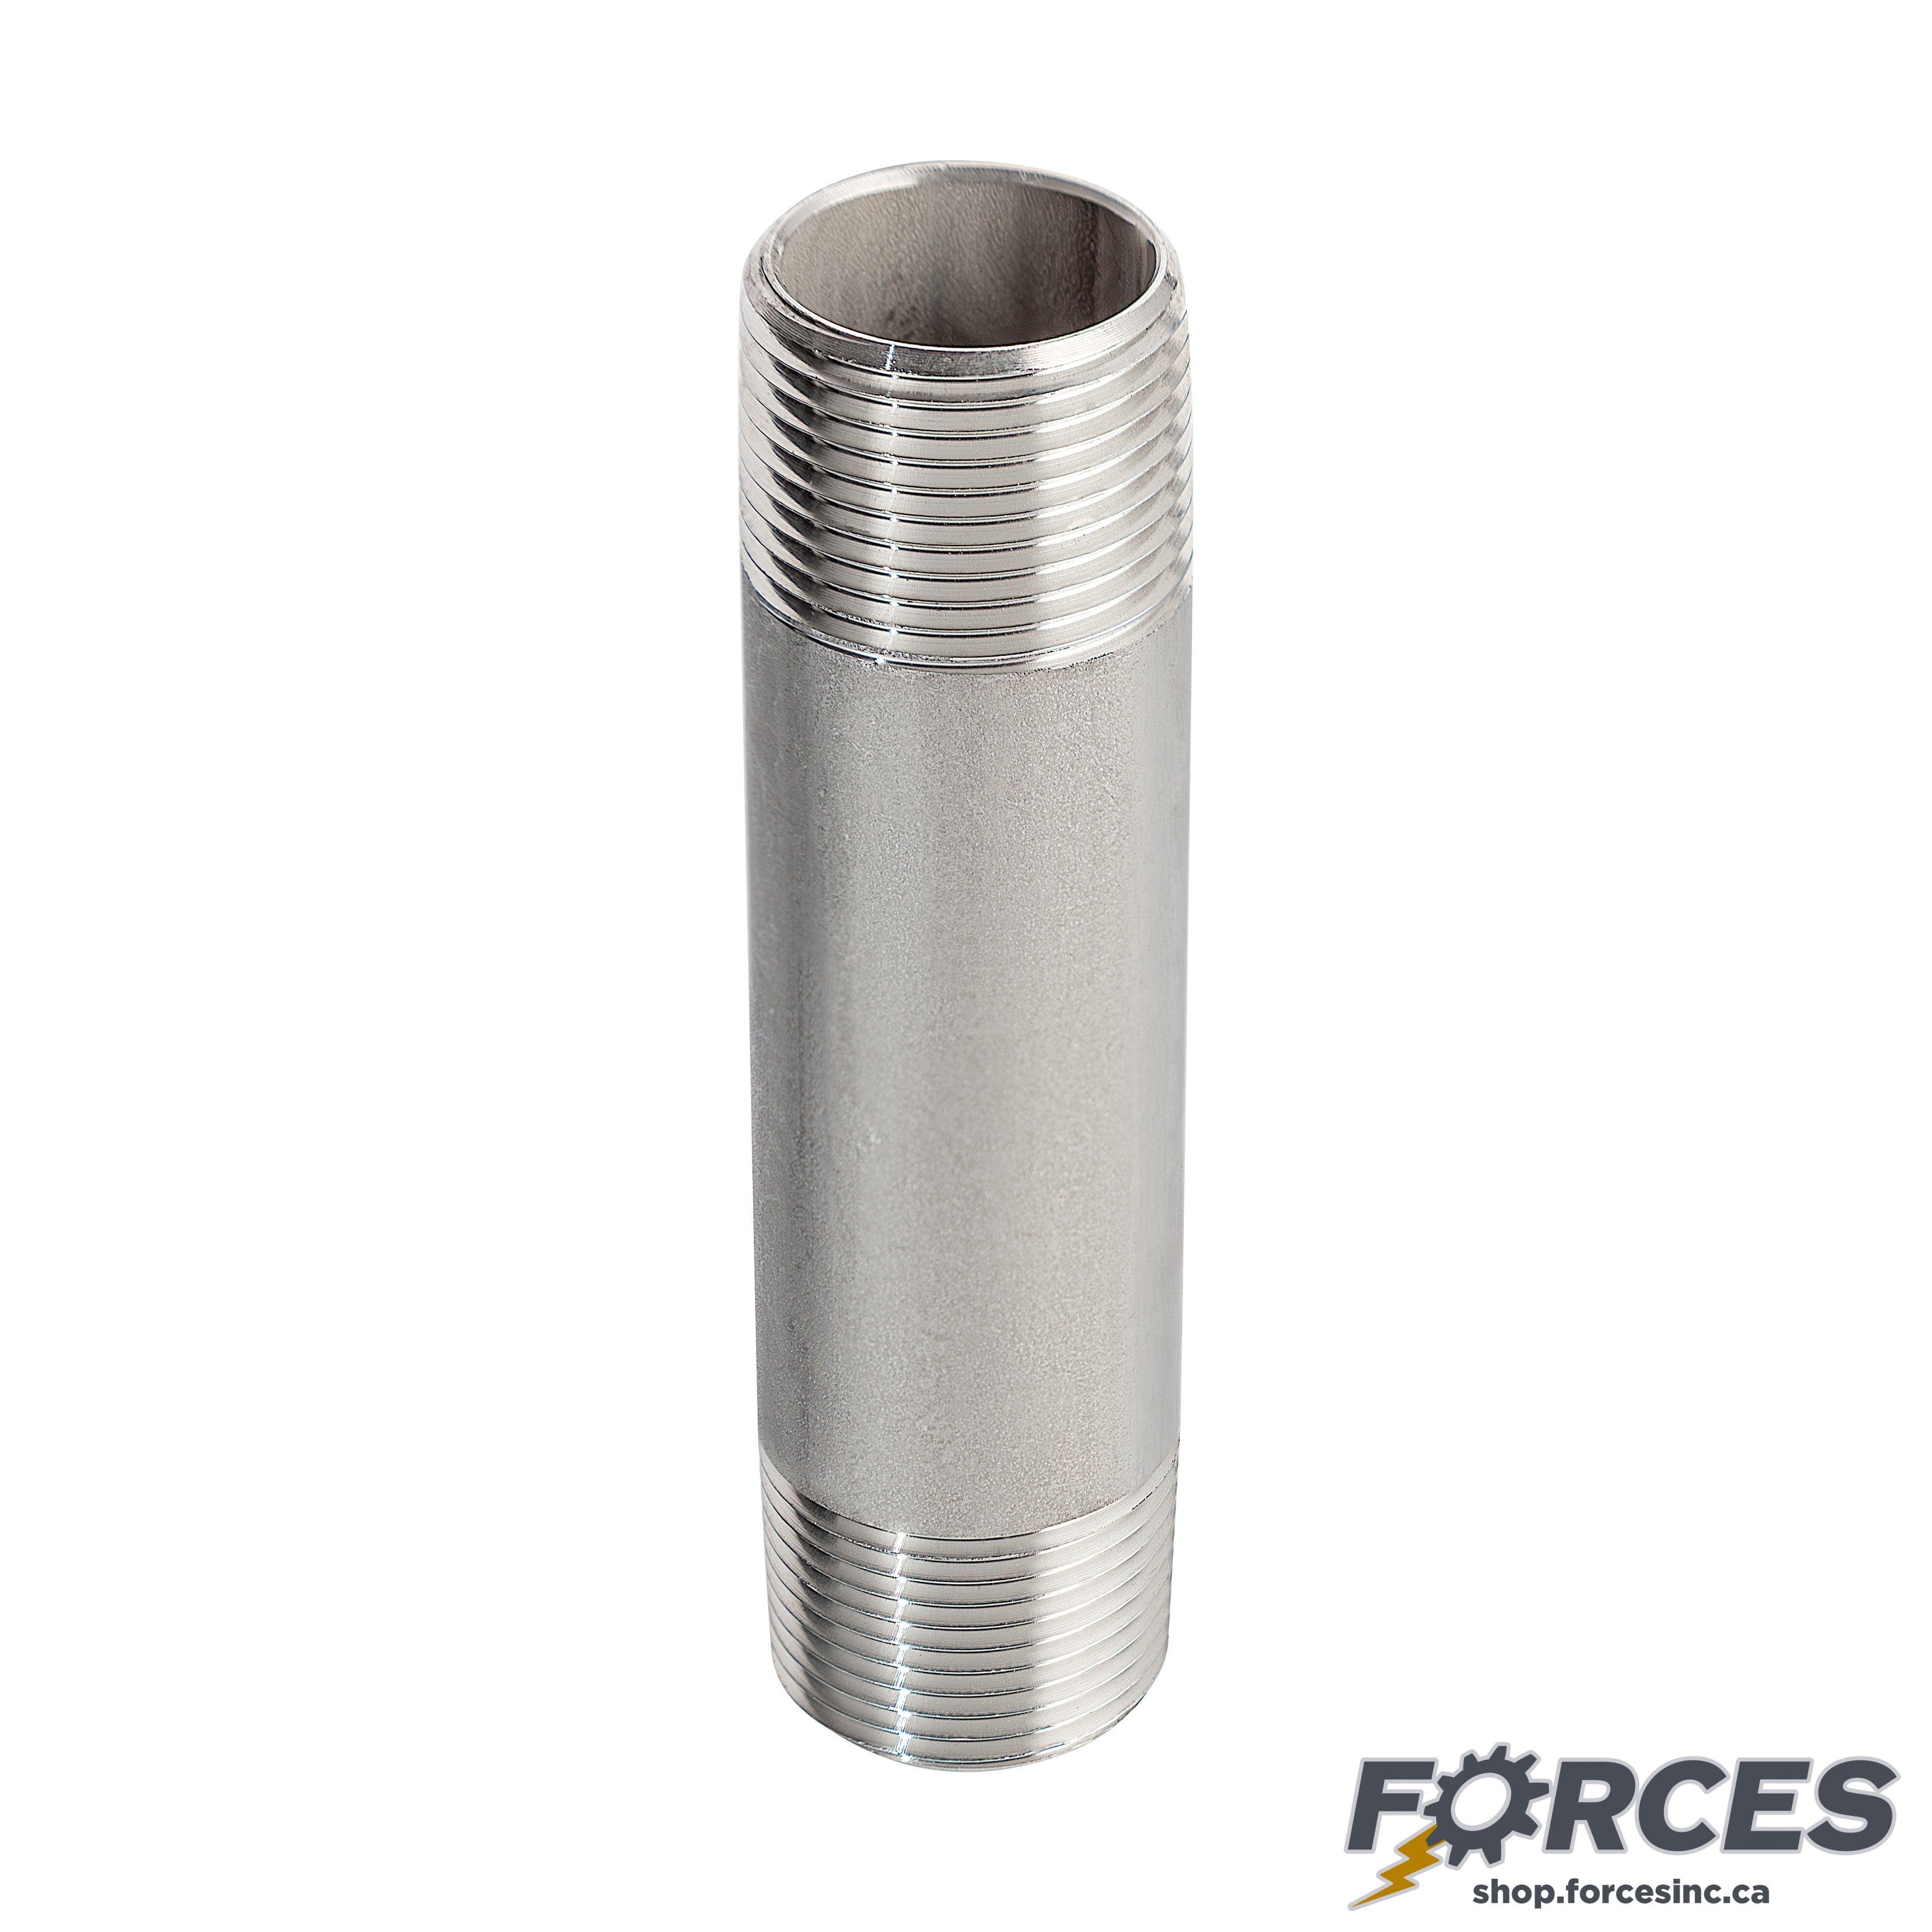 1-1/2" X 3" Long Nipple - Stainless Steel 316 - Forces Inc